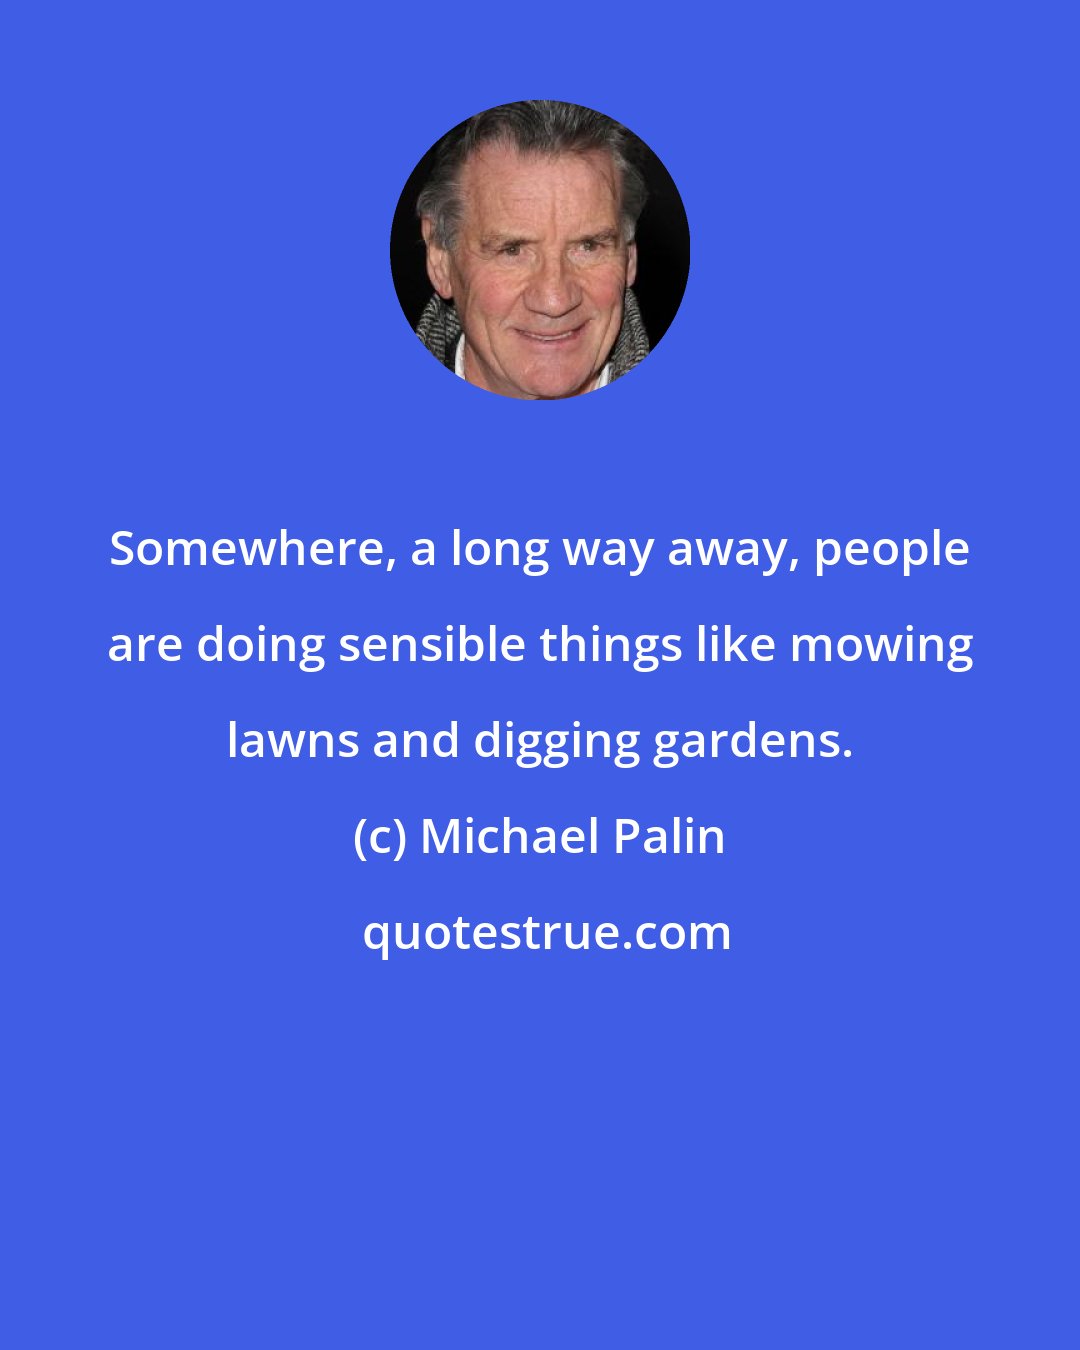 Michael Palin: Somewhere, a long way away, people are doing sensible things like mowing lawns and digging gardens.